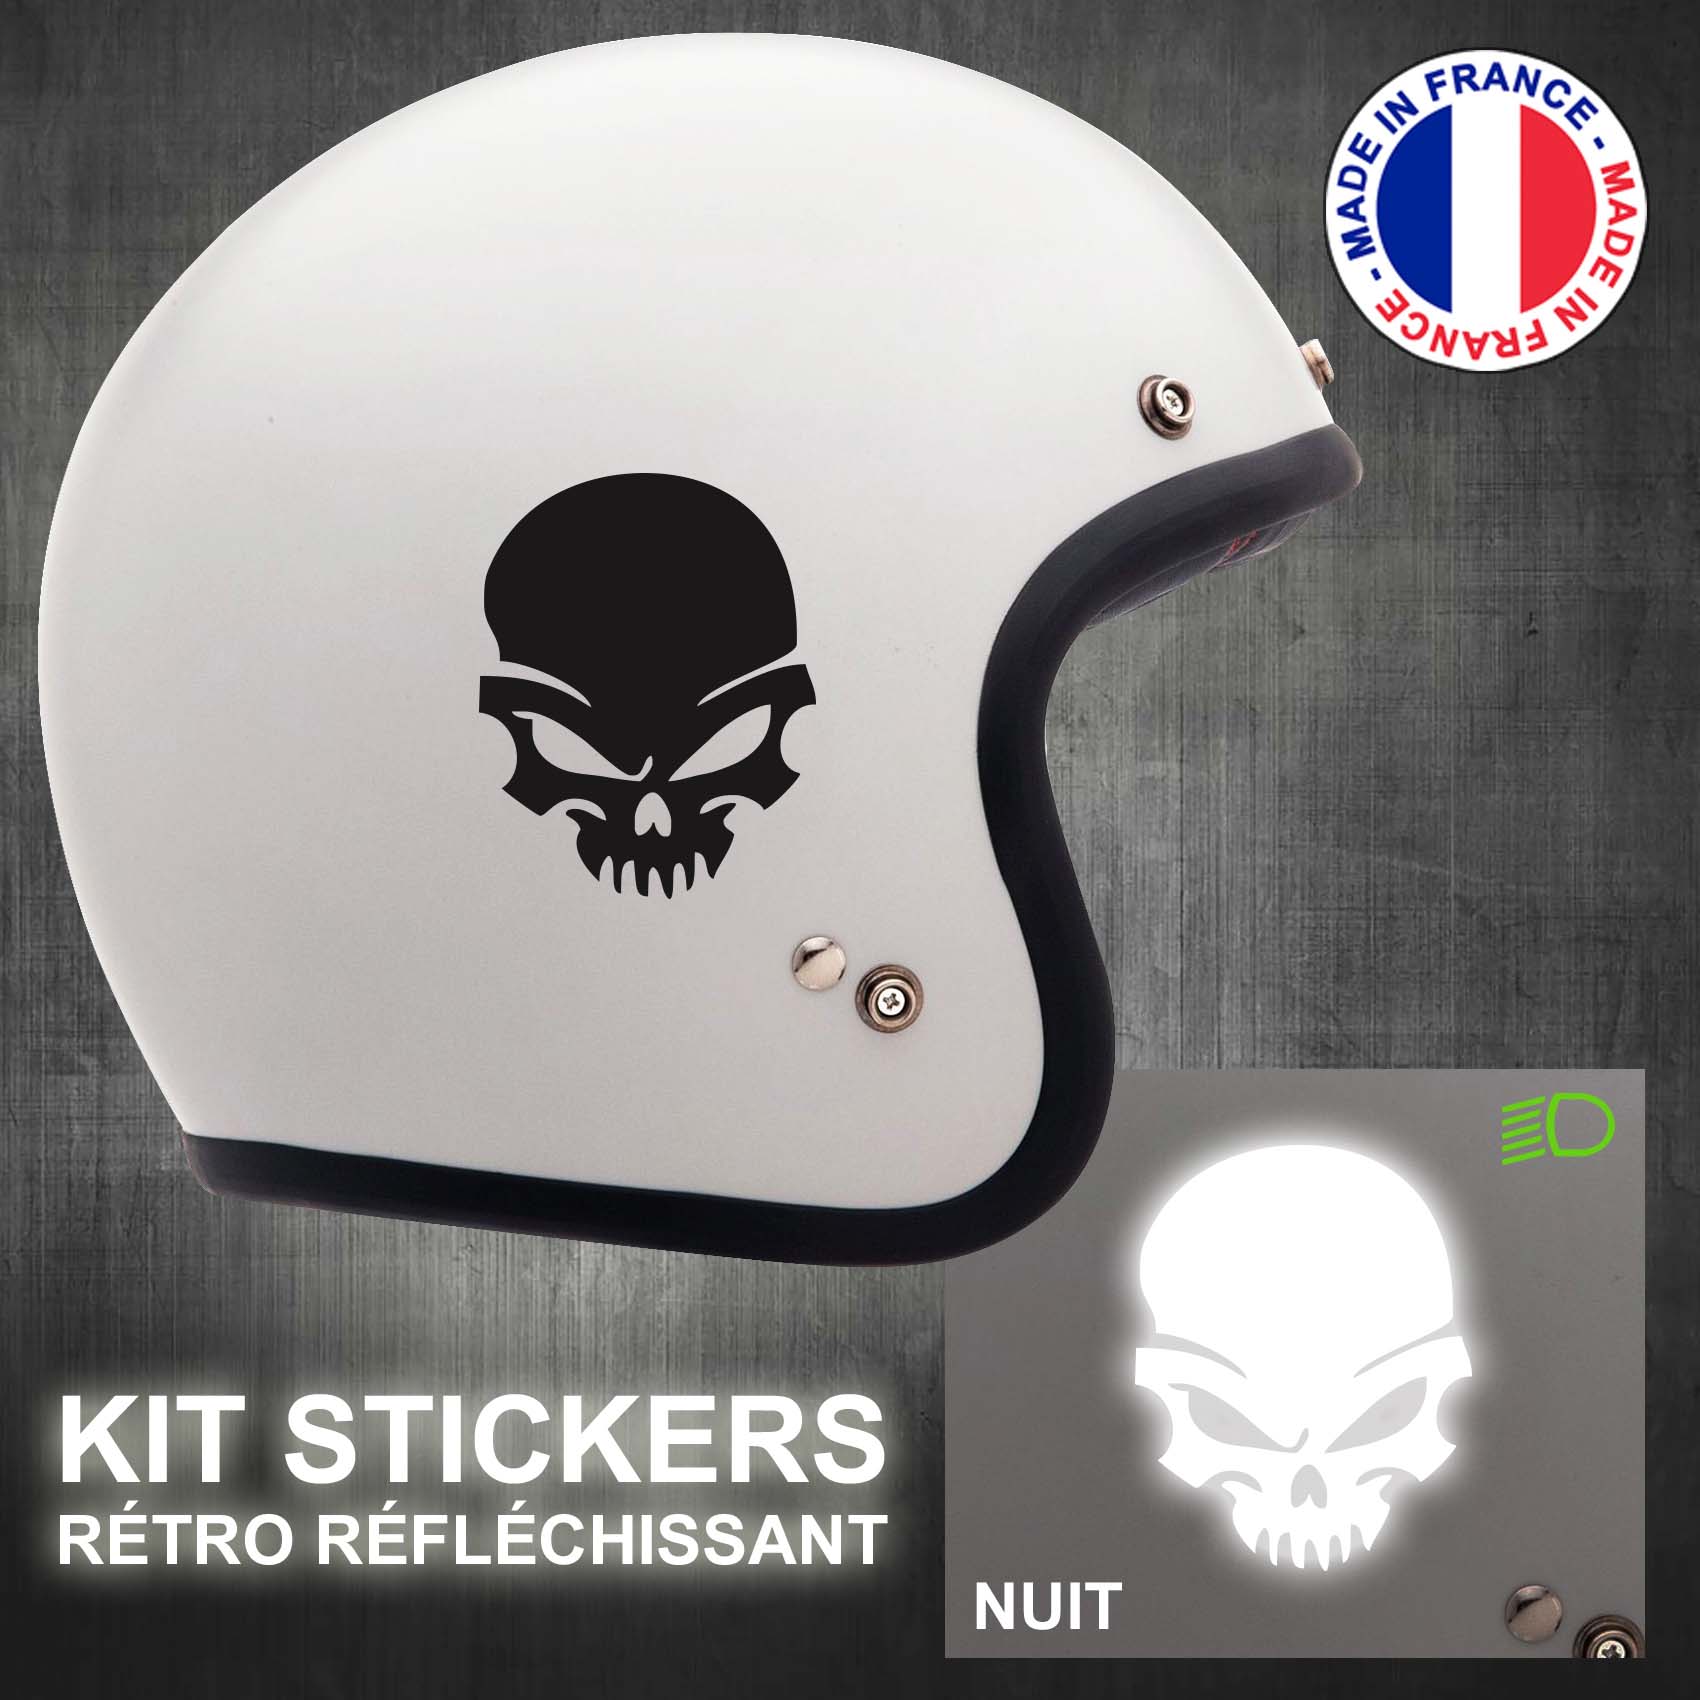 stickers-casque-moto-skull-ref2-retro-reflechissant-autocollant-blanc-moto-velo-tuning-racing-route-sticker-casques-adhesif-scooter-nuit-securite-decals-personnalise-personnalisable-min